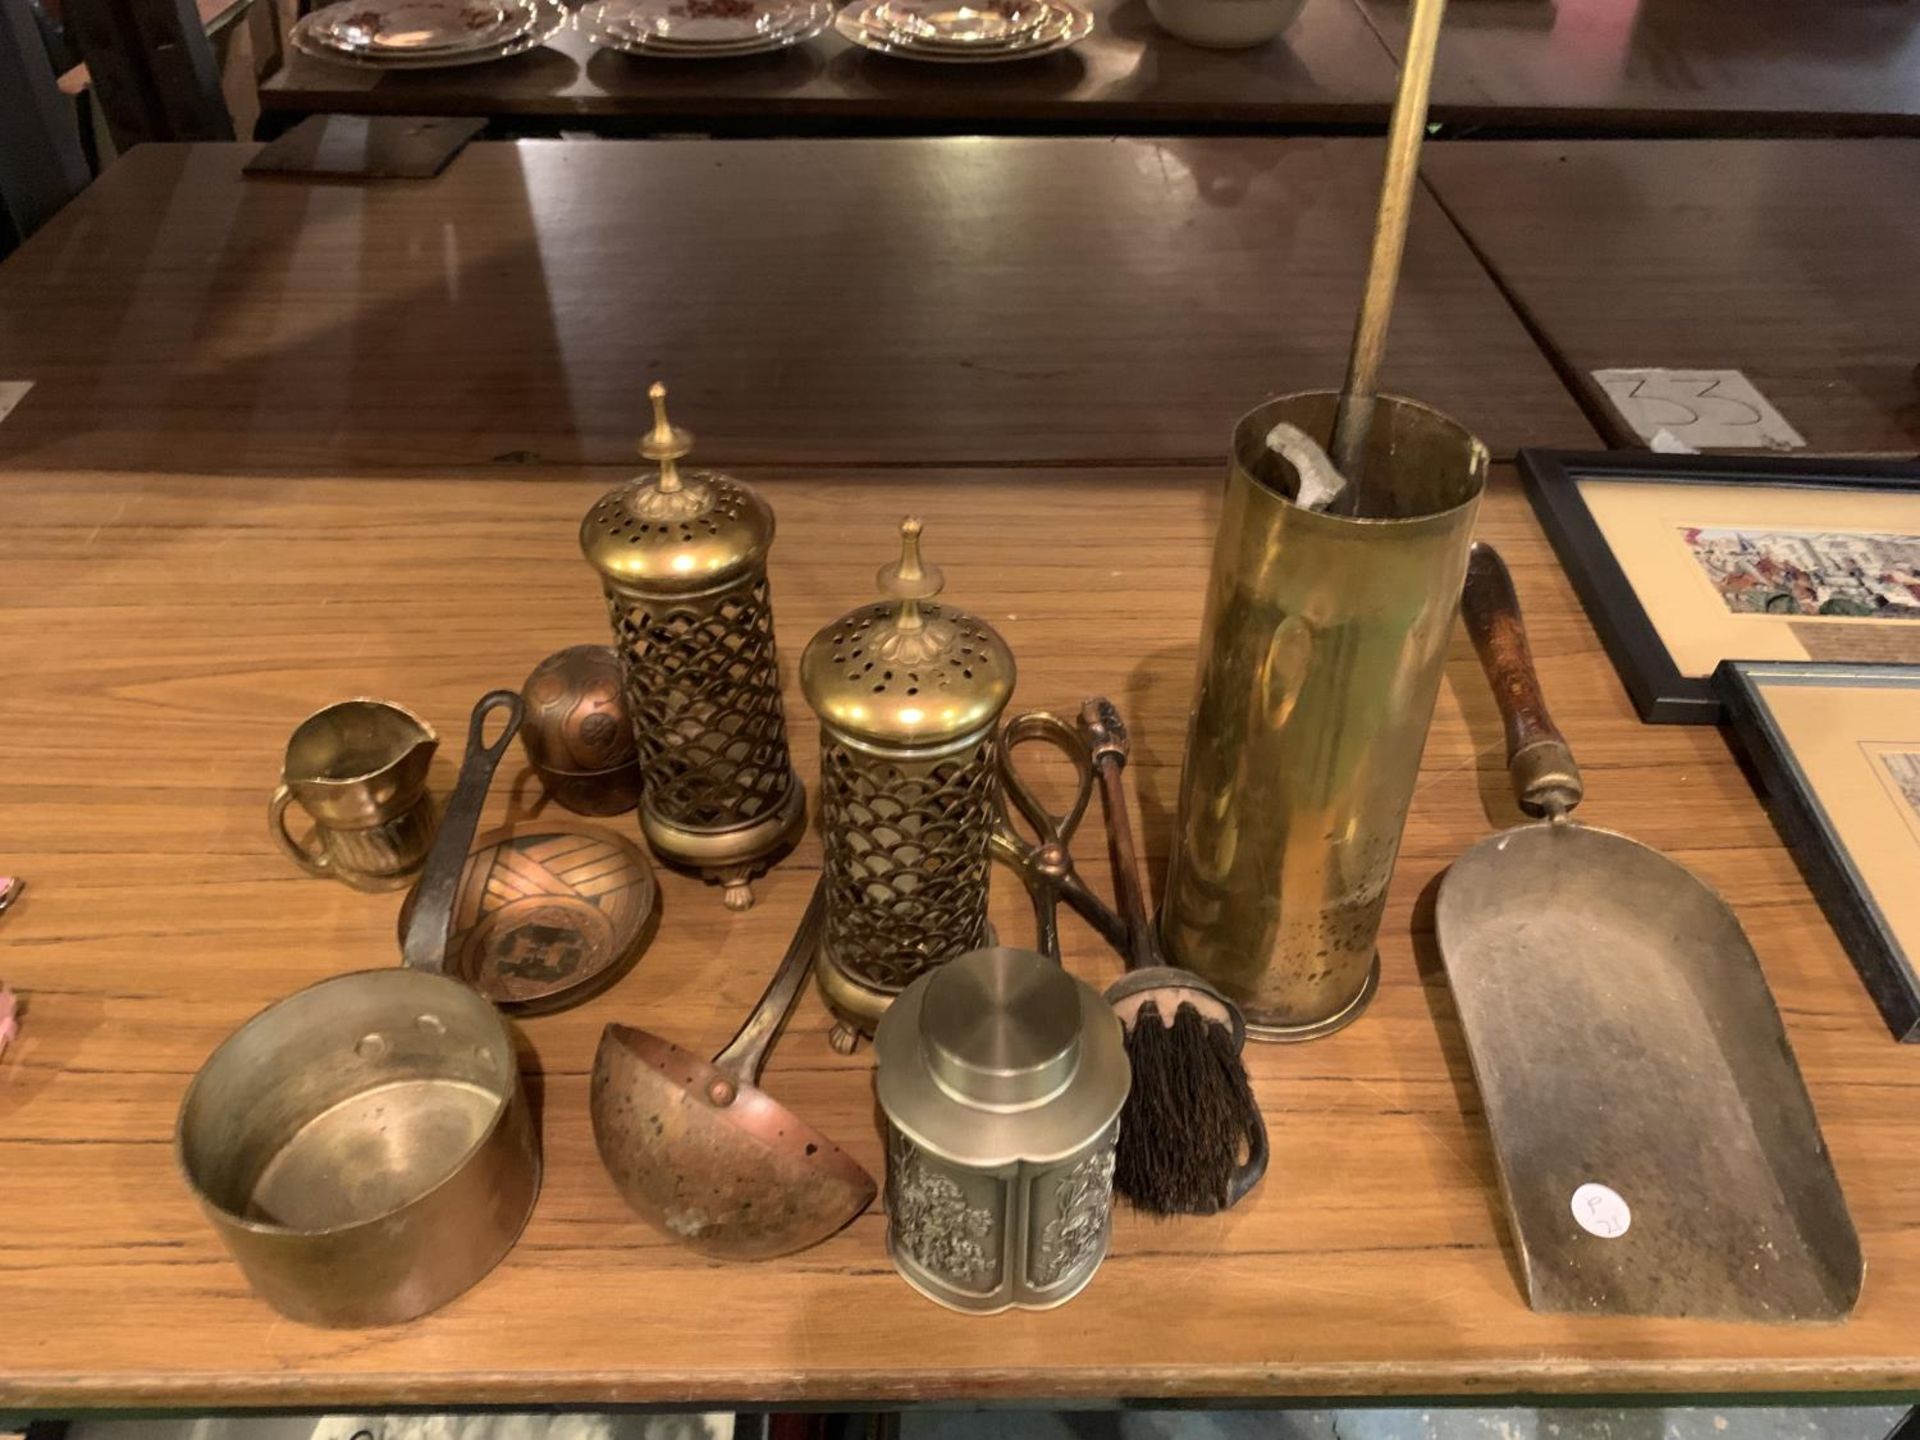 A COLLECTION OF BRASS WARE TO INCLUDE A TRENCH SHELL, DECORATIVE LANTERNS, PAN, LADLE ETC